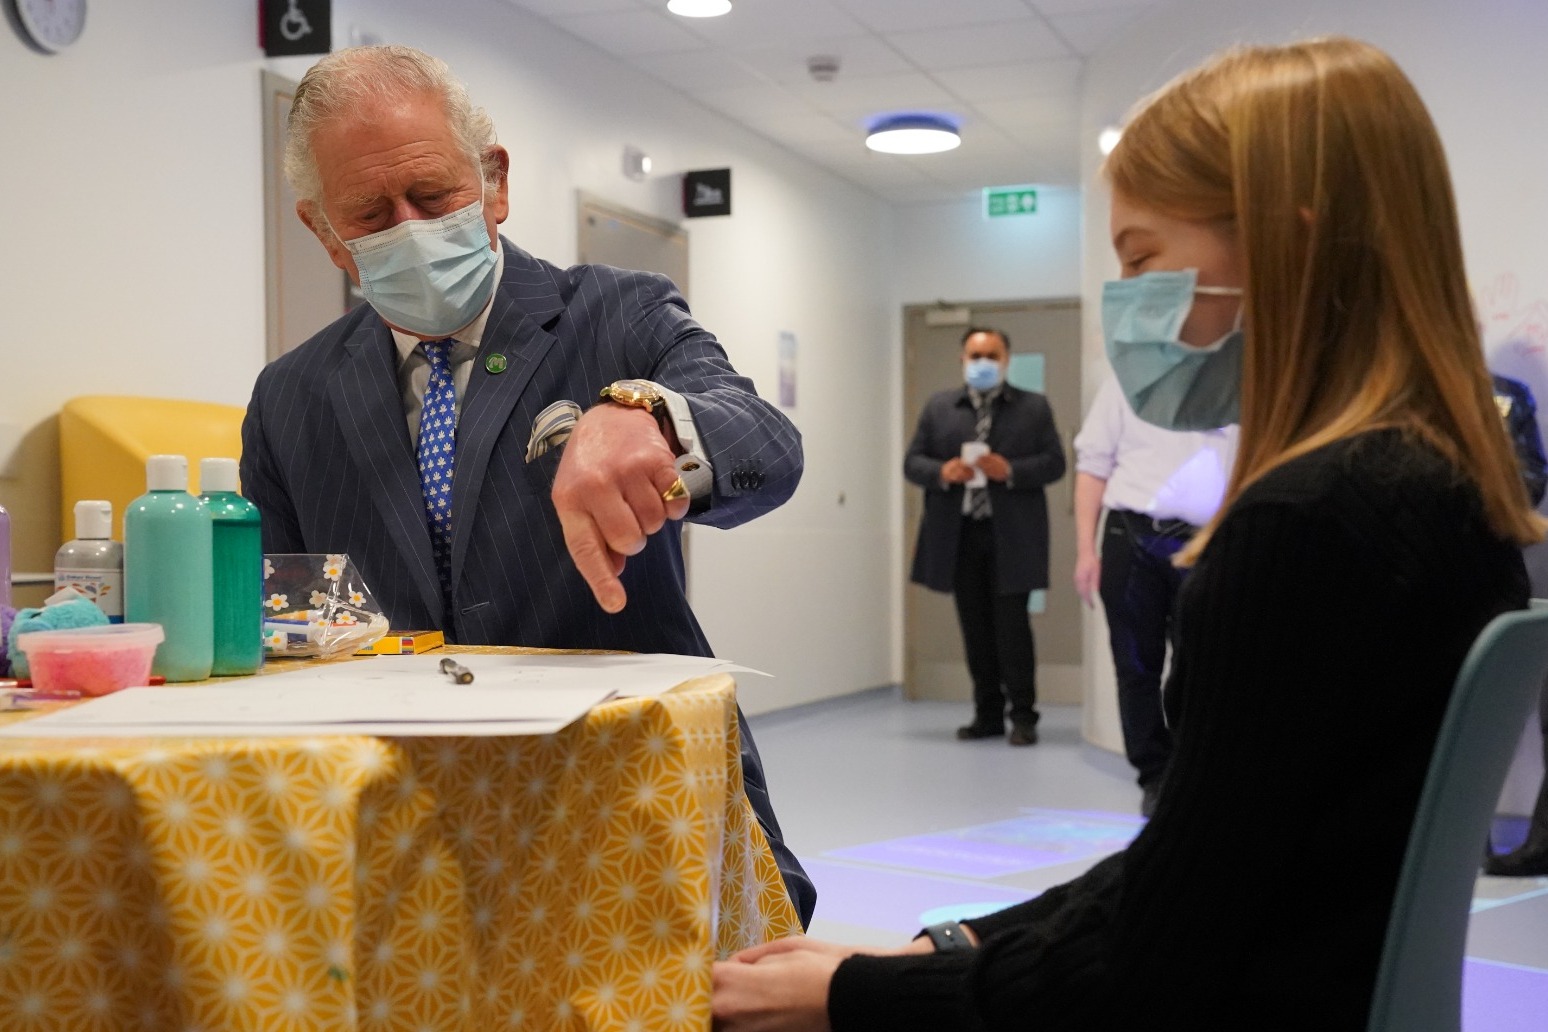 Charles praises NHS as he opens 380m cancer treatment centre